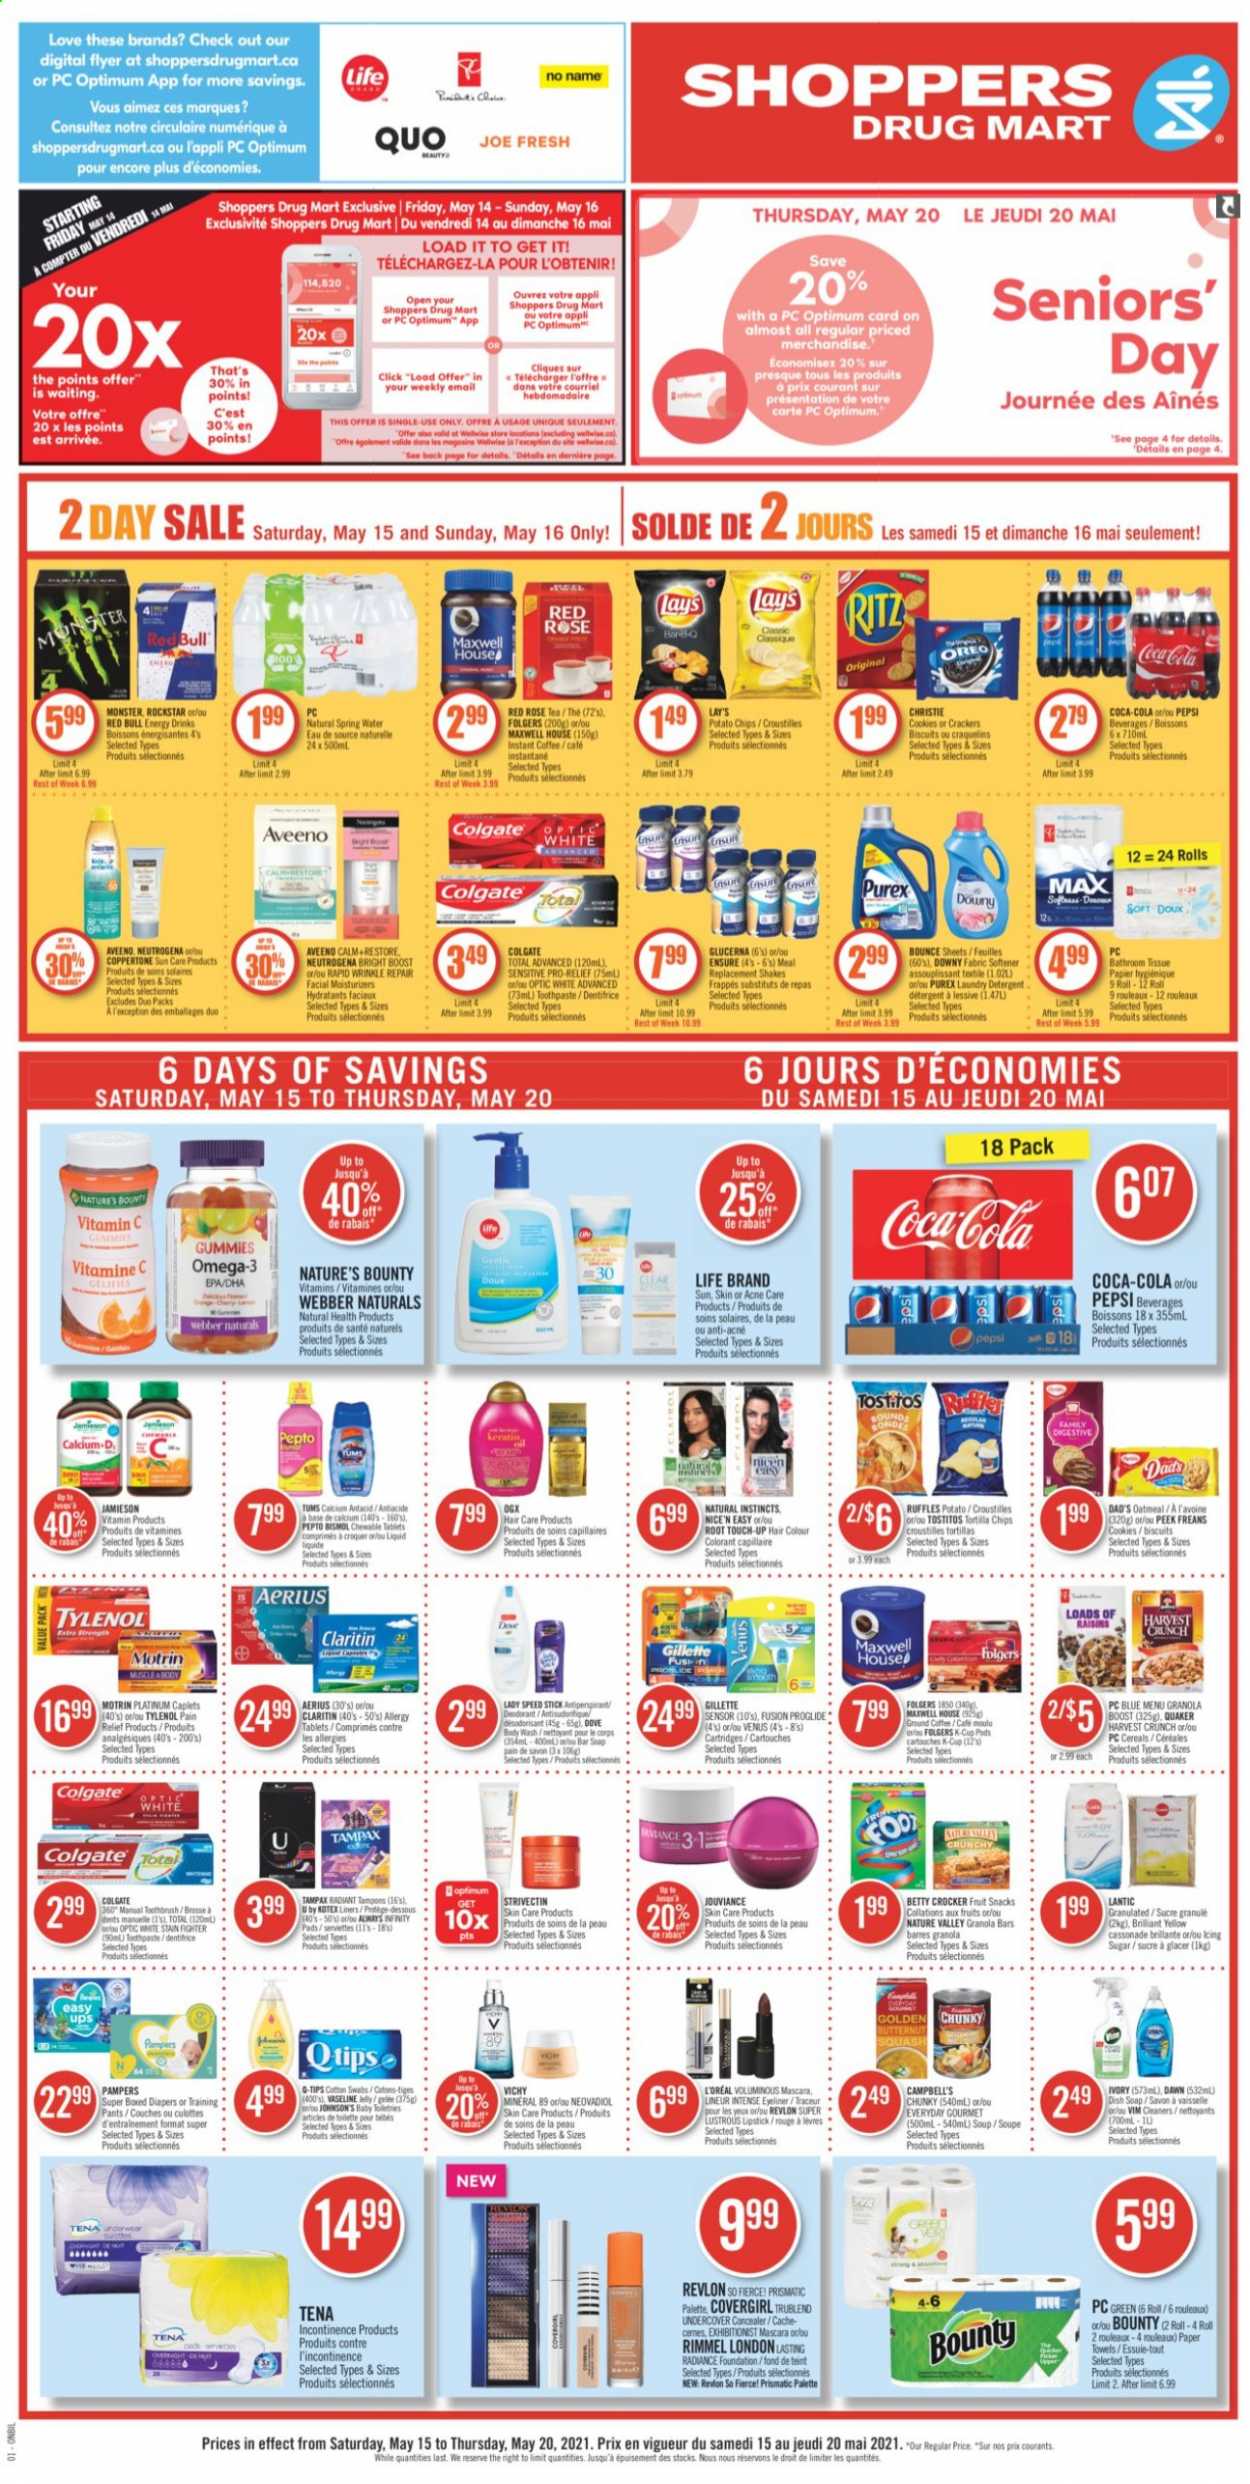 thumbnail - Shoppers Drug Mart Flyer - May 15, 2021 - May 20, 2021 - Sales products - cookies, jelly, crackers, biscuit, fruit snack, RITZ, tortilla chips, potato chips, Lay’s, Ruffles, Tostitos, sugar, oatmeal, icing sugar, soup, cereals, granola bar, Quaker, Nature Valley, Campbell's, dried fruit, Coca-Cola, Pepsi, energy drink, Monster, Red Bull, Rockstar, spring water, Boost, Maxwell House, tea, instant coffee, Folgers, ground coffee, coffee capsules, K-Cups, pants, nappies, Johnson's, baby pants, Aveeno, bath tissue, kitchen towels, paper towels, fabric softener, laundry detergent, Bounce, Purex, Downy Laundry, body wash, Vichy, Vaseline, soap, toothbrush, toothpaste, Kotex, tampons, L’Oréal, moisturizer, OGX, Root Touch-Up, Revlon, hair color, keratin, anti-perspirant, Speed Stick, Venus, corrector, lipstick, Rimmel, eyeliner, pain relief, Nature's Bounty, Tylenol, vitamin c, Omega-3, Glucerna, Antacid, Motrin, Oreo, Gillette, mascara, Neutrogena, raisins, Tampax, Palette, Pampers, chips, deodorant. Page 1.